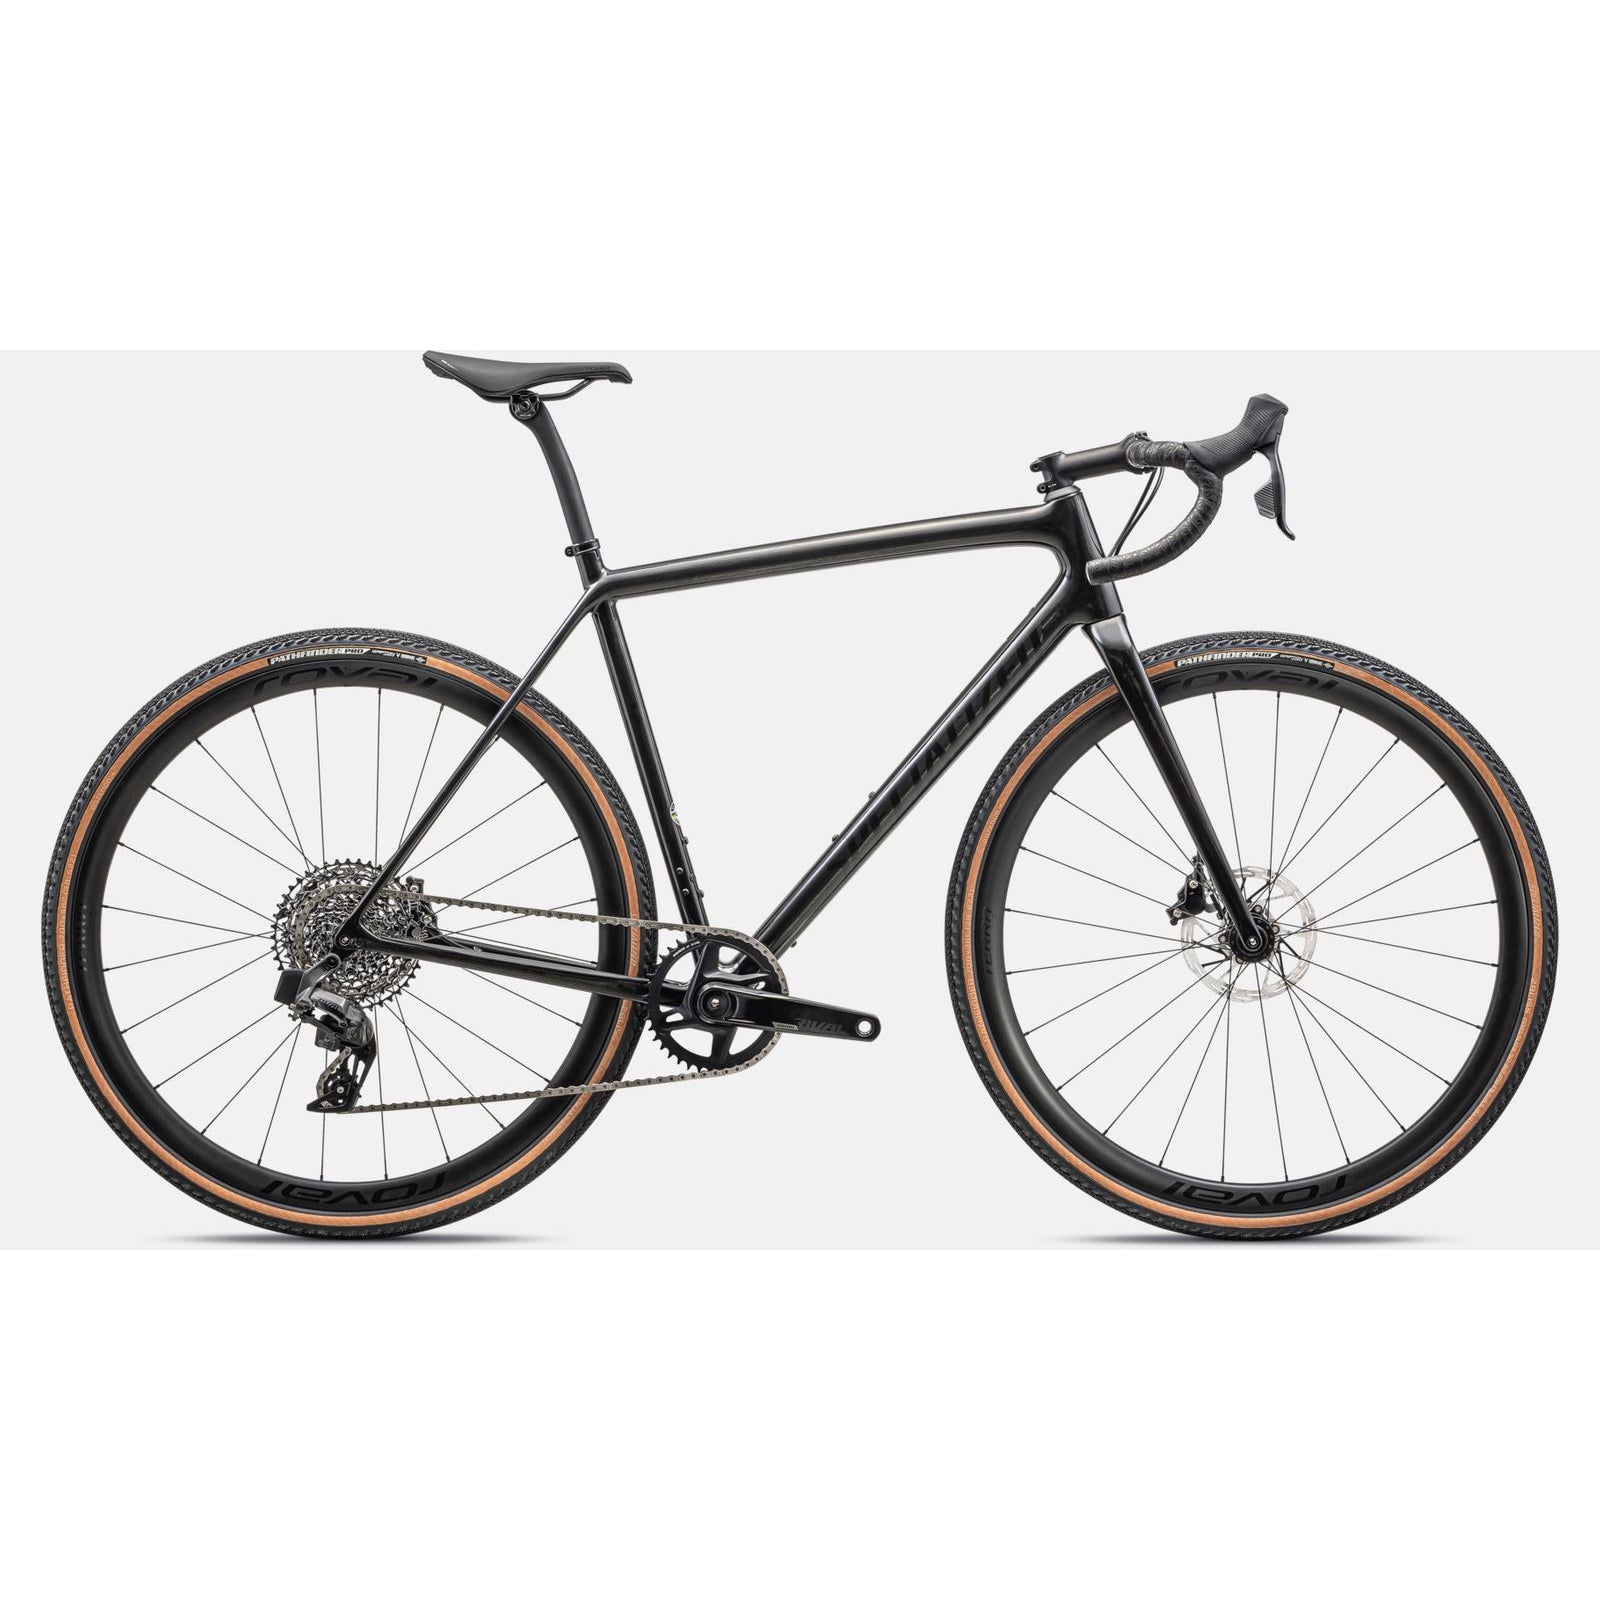 Specialized Crux Expert Gravel Road Bike - Bikes - Bicycle Warehouse